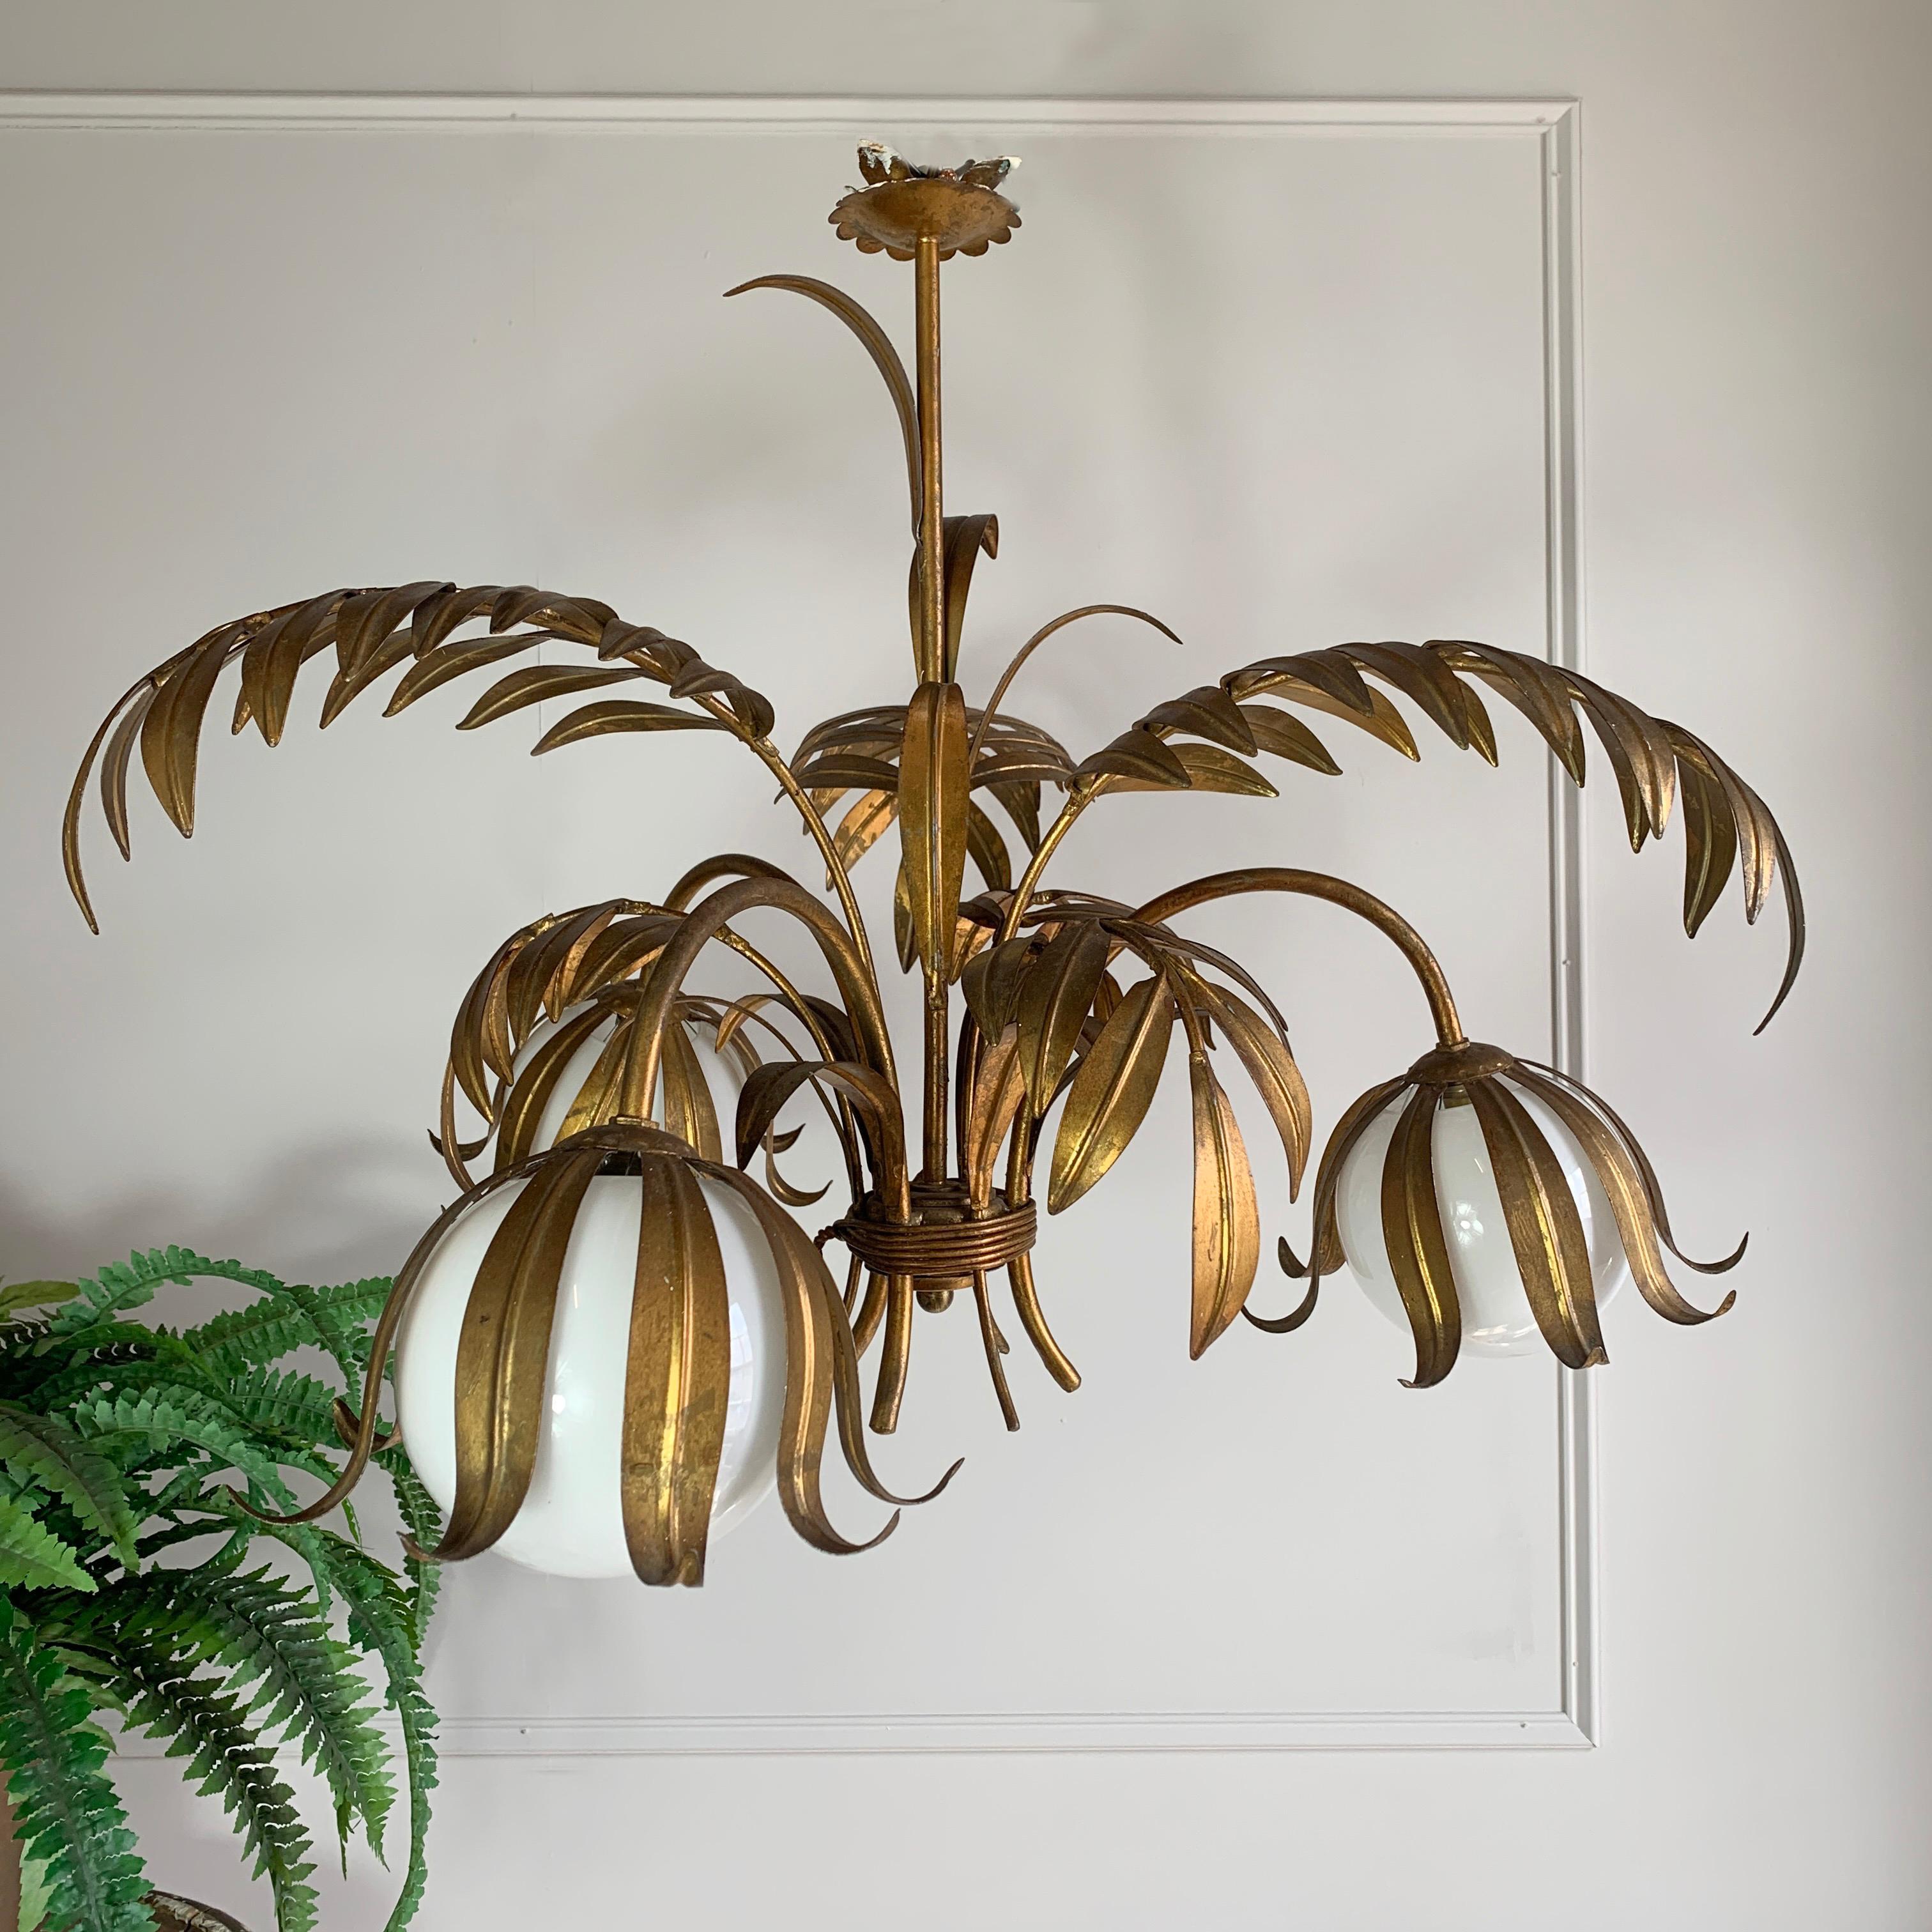 Hans Kogl palm leaf & globe chandelier, 1970’S
Fabulous Large Hans Kogl gilt palm leaf tole chandelier
1970'S, Belgium
Wide naturalistic palm leaves create the chandelier design
There are three arms holding a single bulb holder each
Three milk